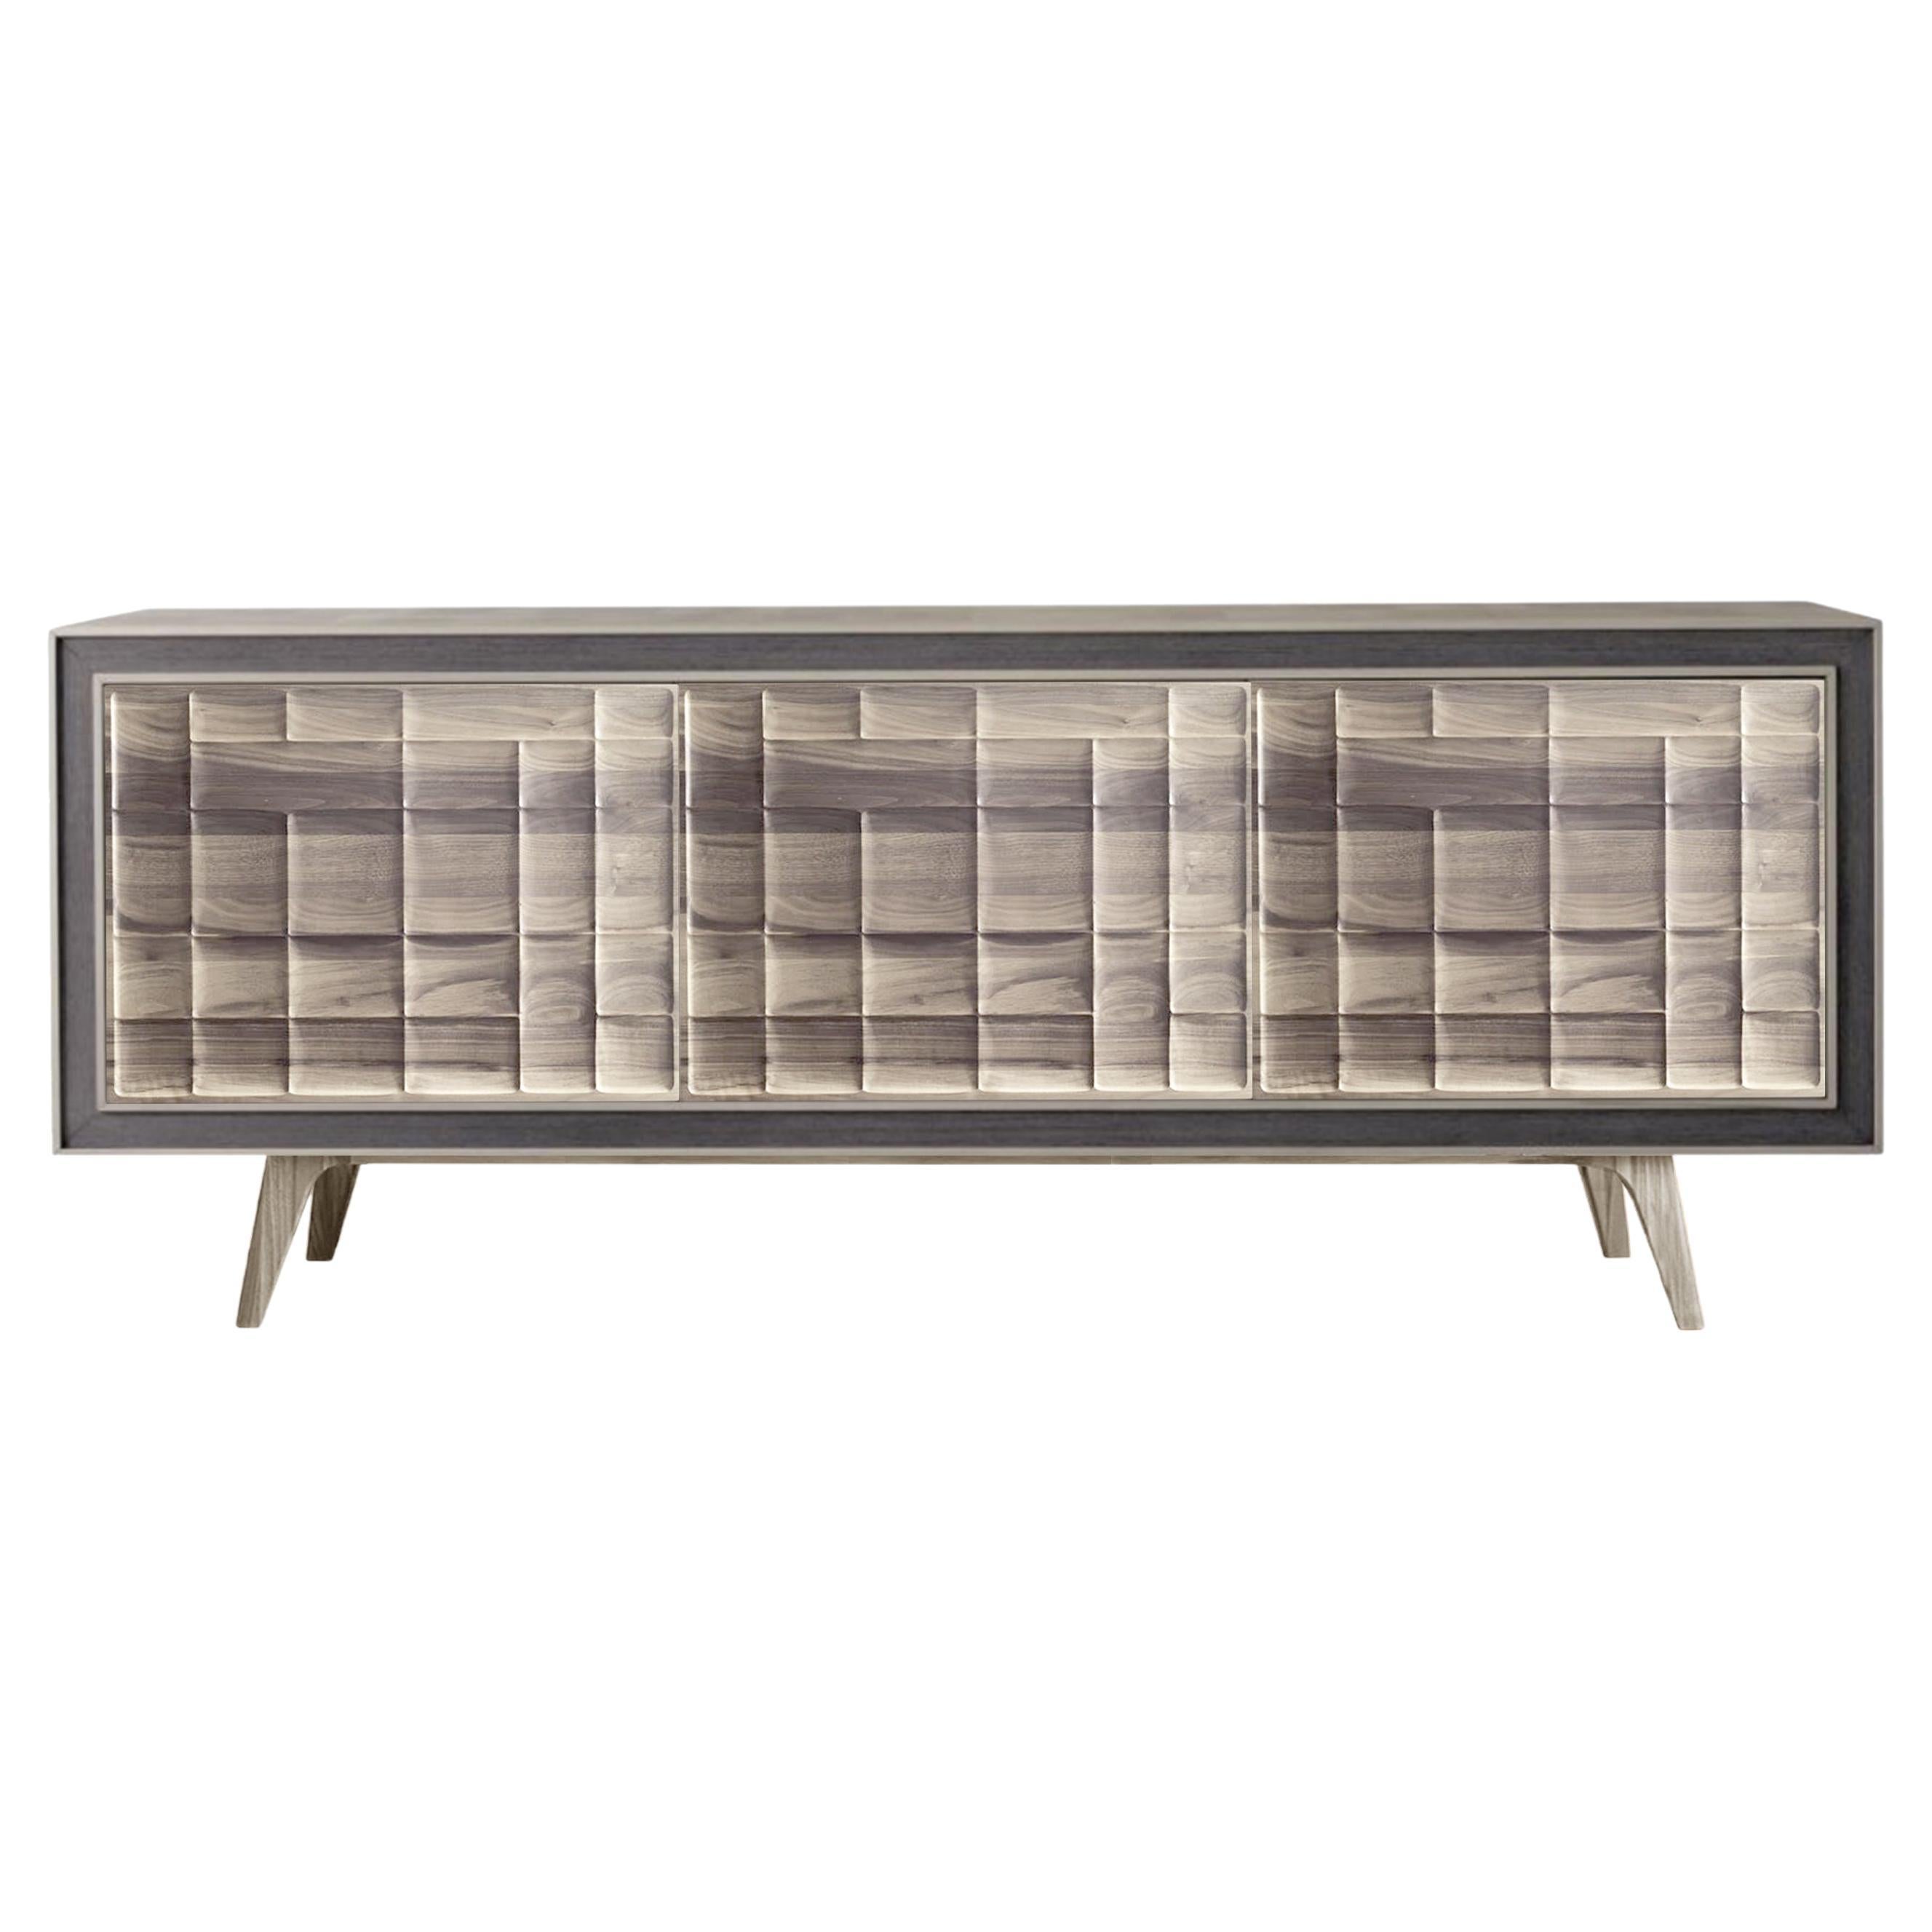 Quadra Scacco Solid Wood Sideboard, Walnut in Natural Grey Finish, Contemporary For Sale